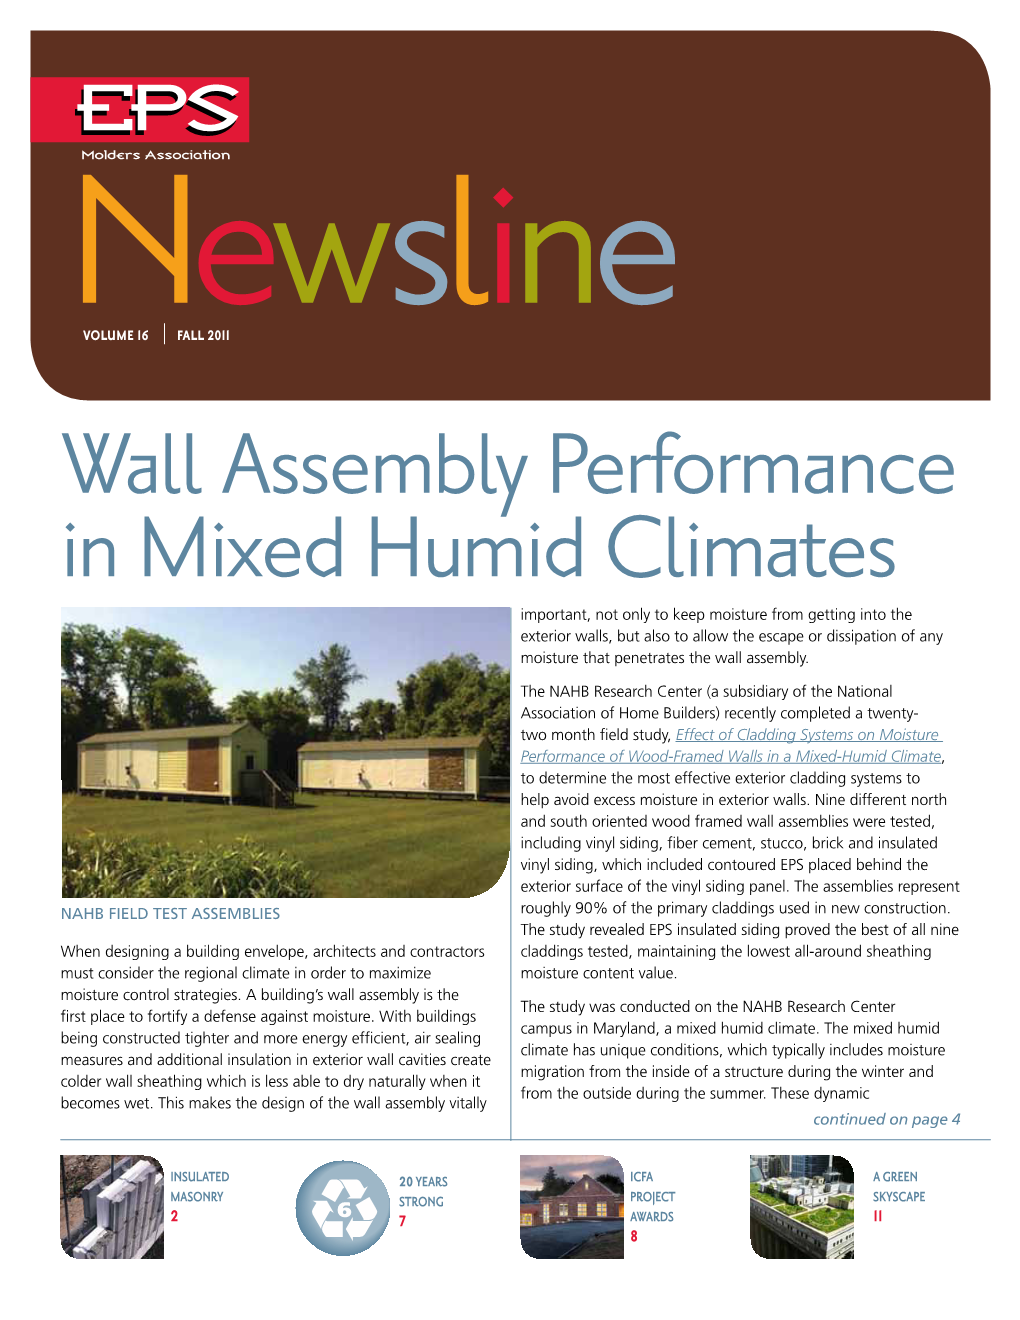 Wall Assembly Performance in Mixed Humid Climates